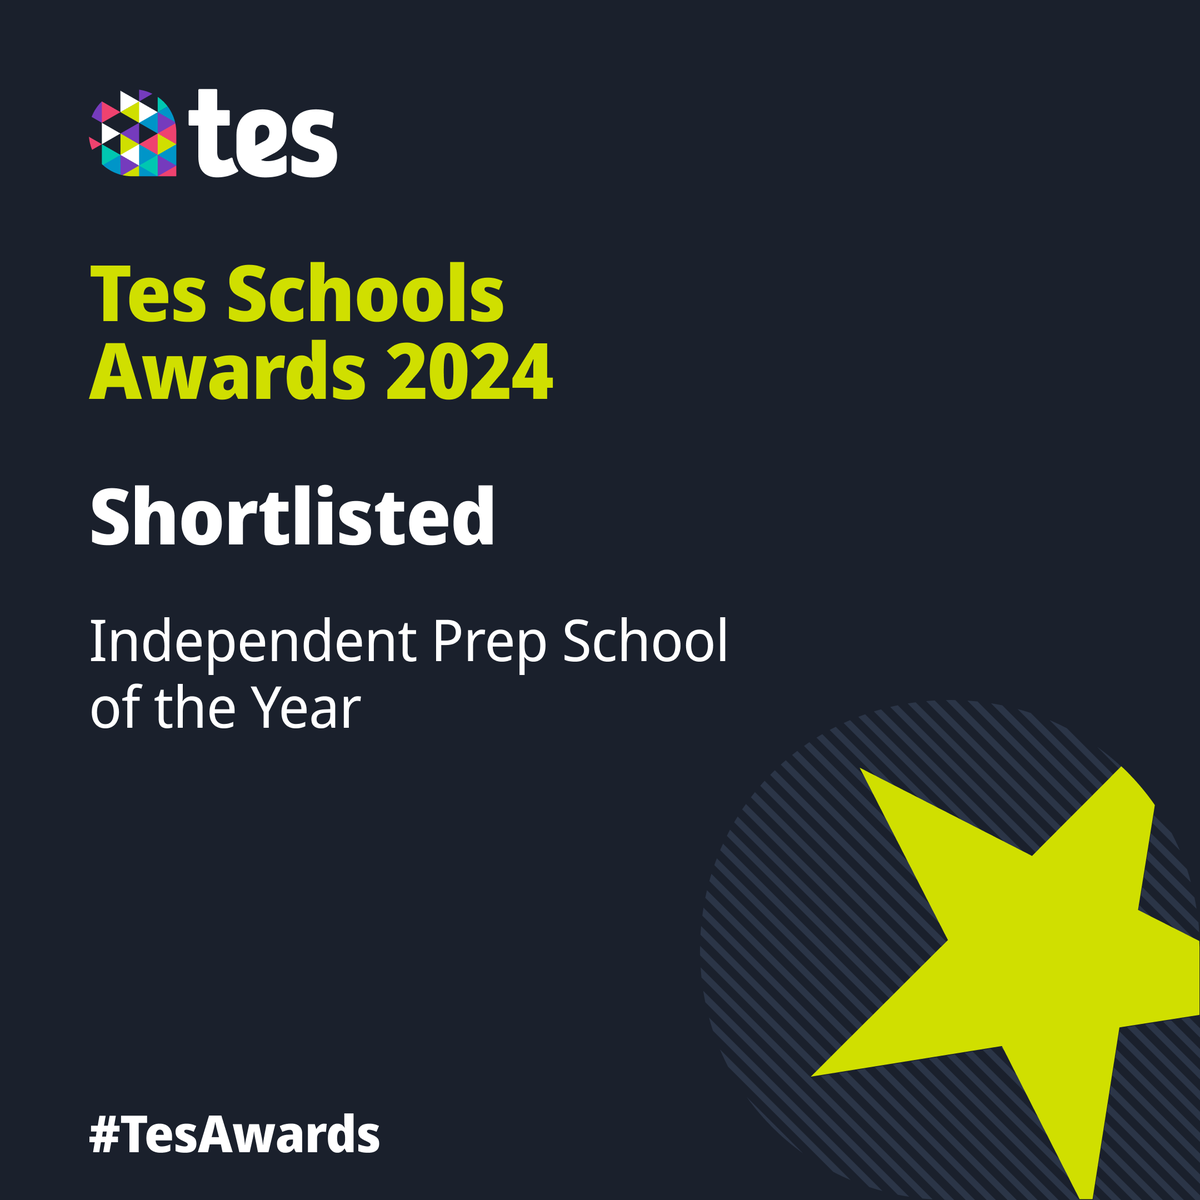 Huge congrats to @CaterhamPrep - Shortlisted for @tes Best Independent Prep School in the #TesAwards 2024! Doubly delighted as this follows on from Caterham School's win for Tes Best Independent Senior School in 2023!